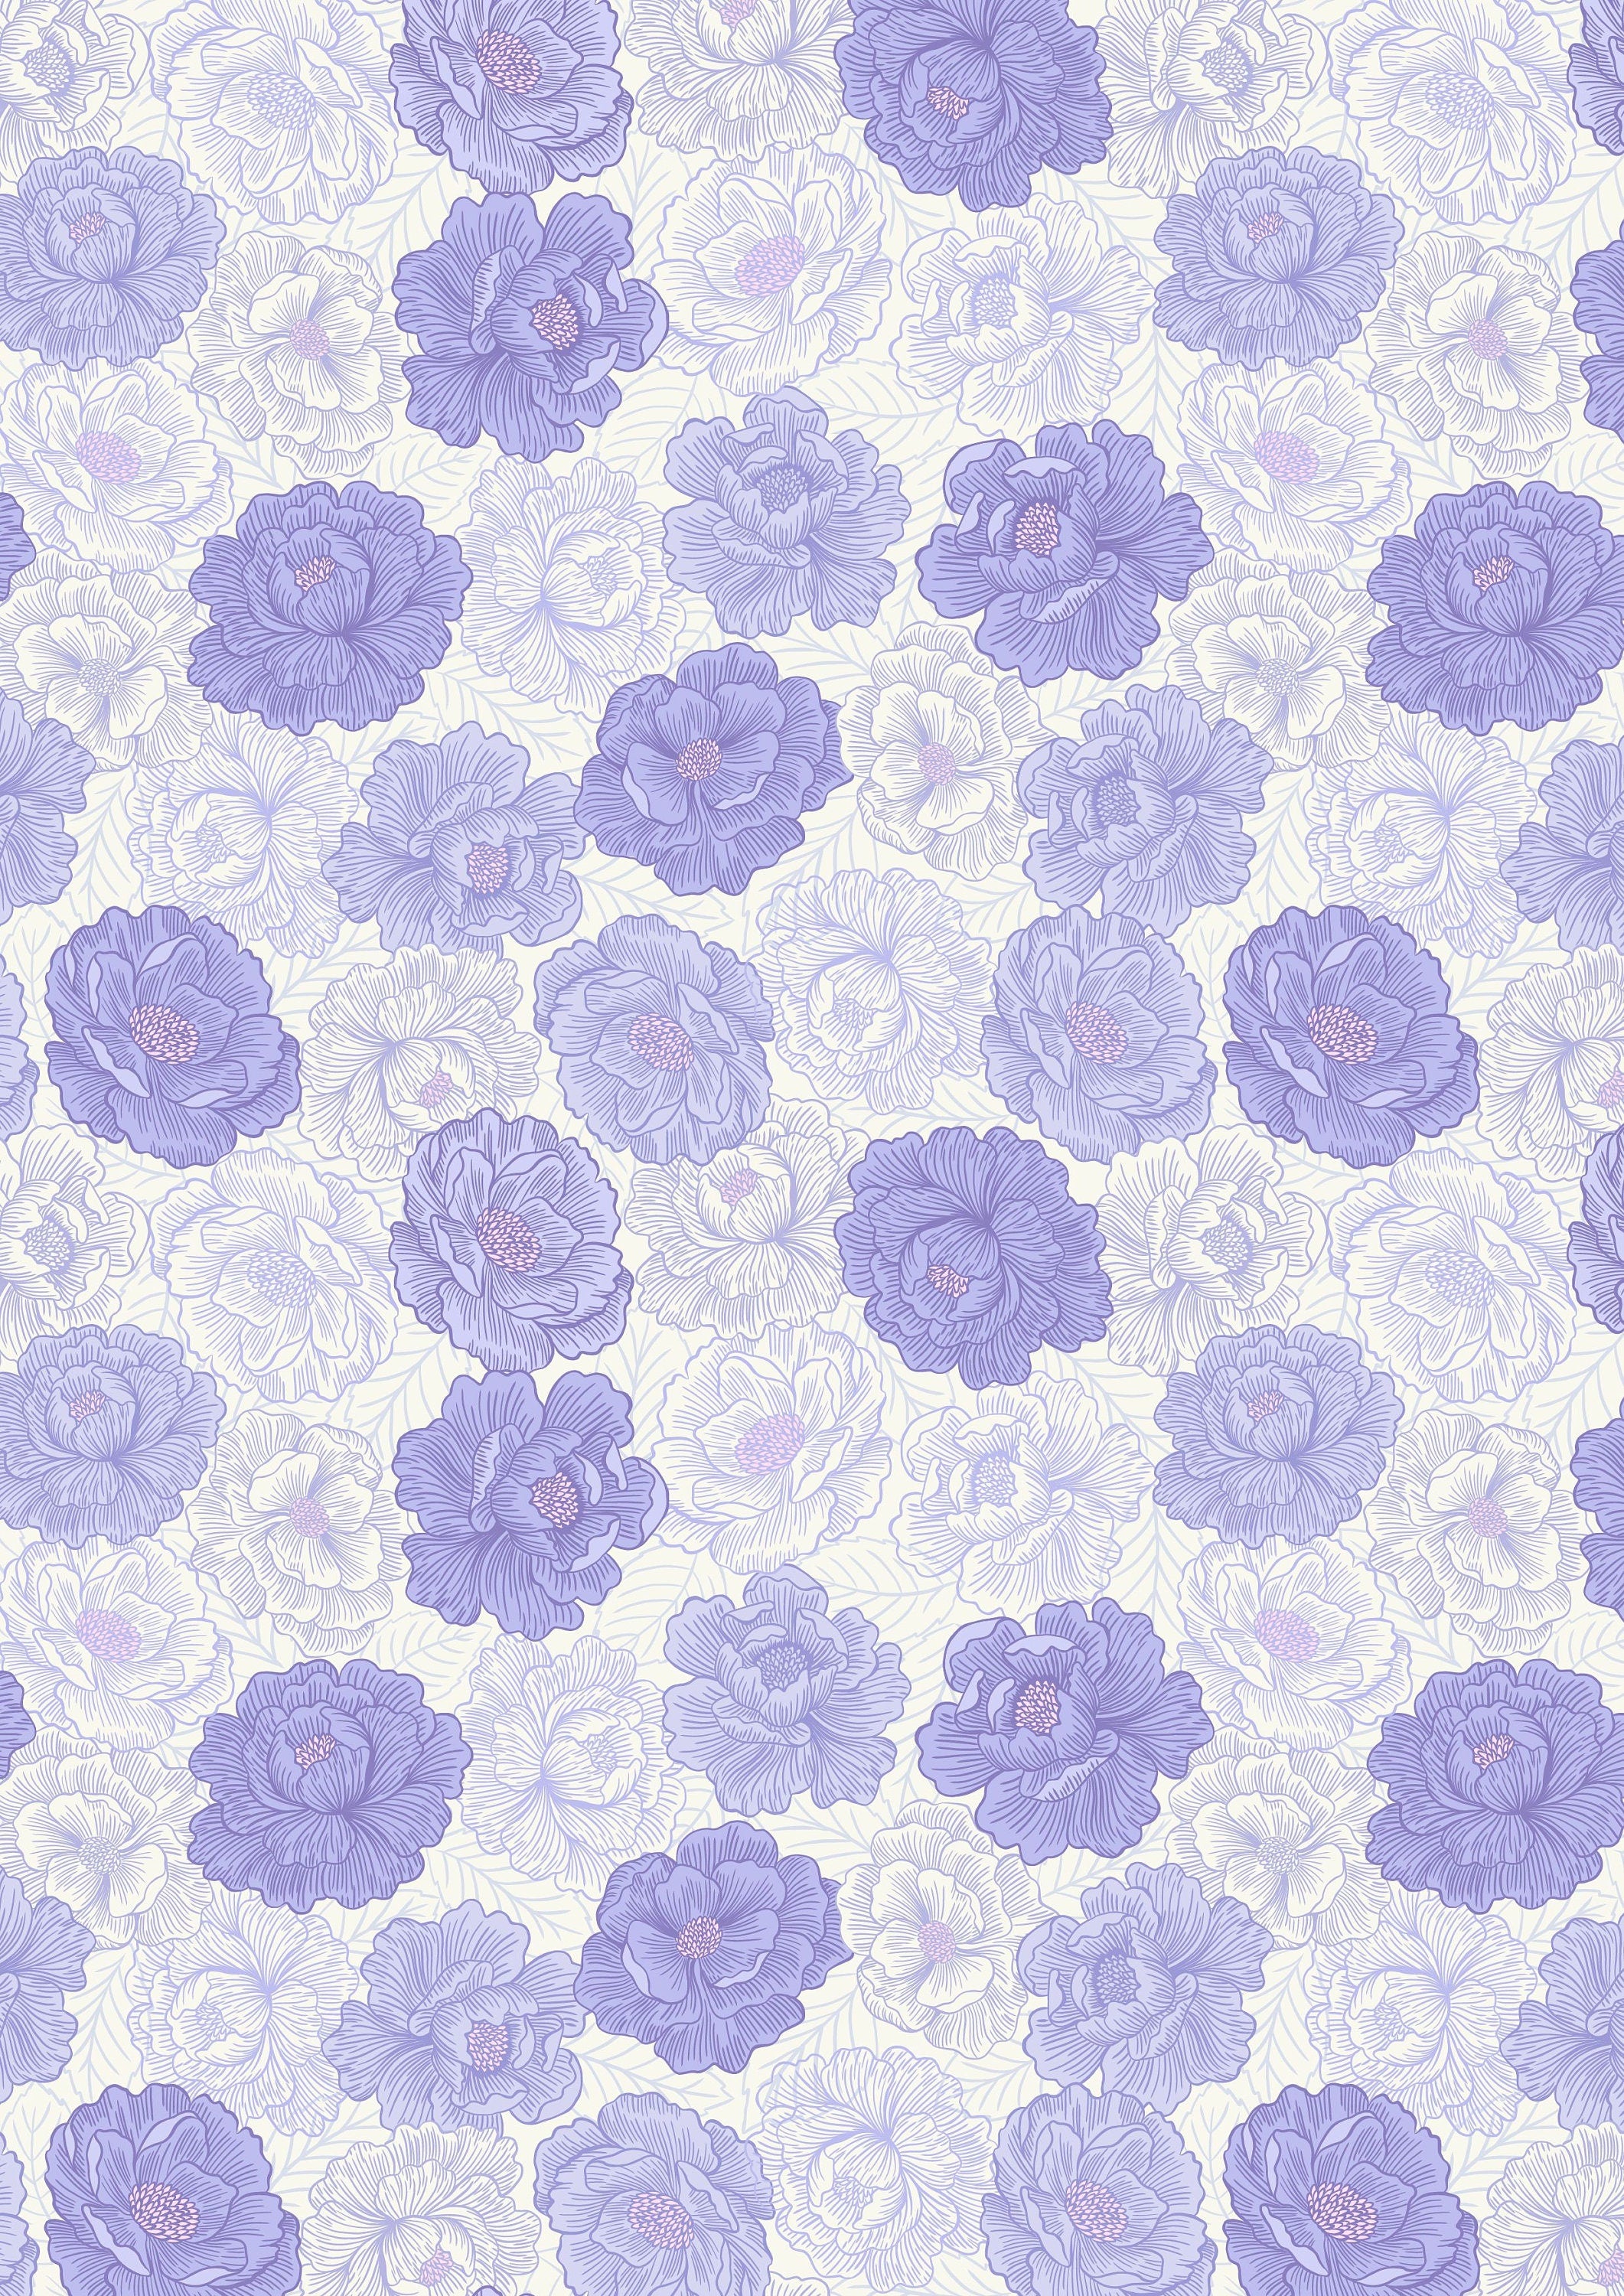 Flowers Petals on purple cotton fabric - Love Blooms by Lewis & Irene